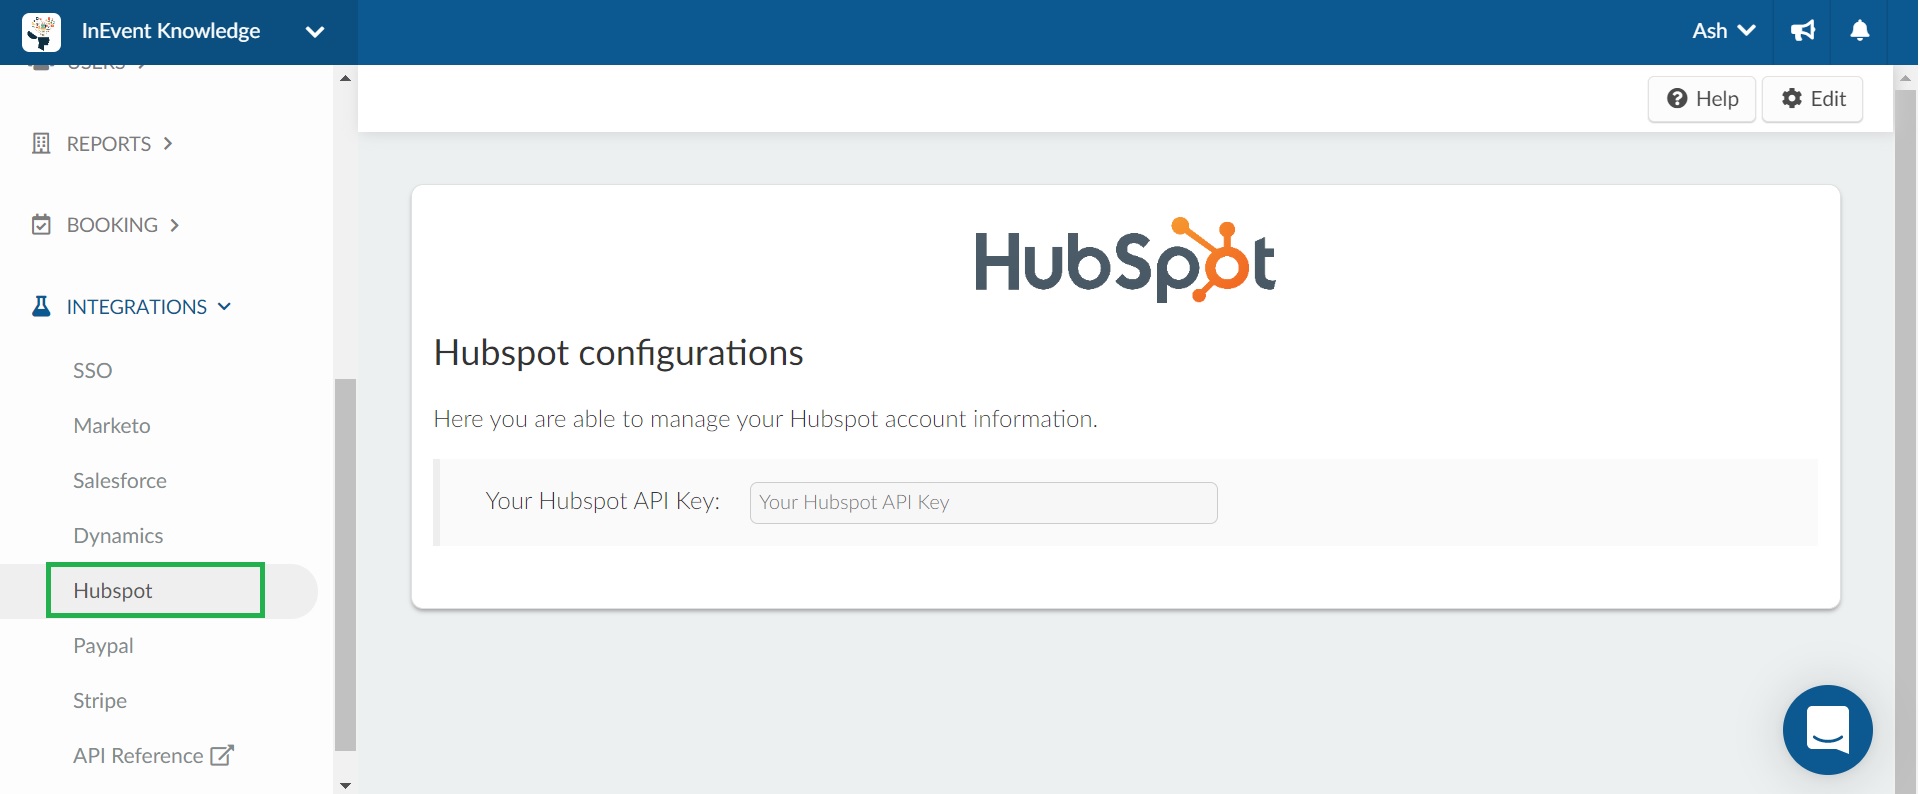 Hubspot integration on the company level